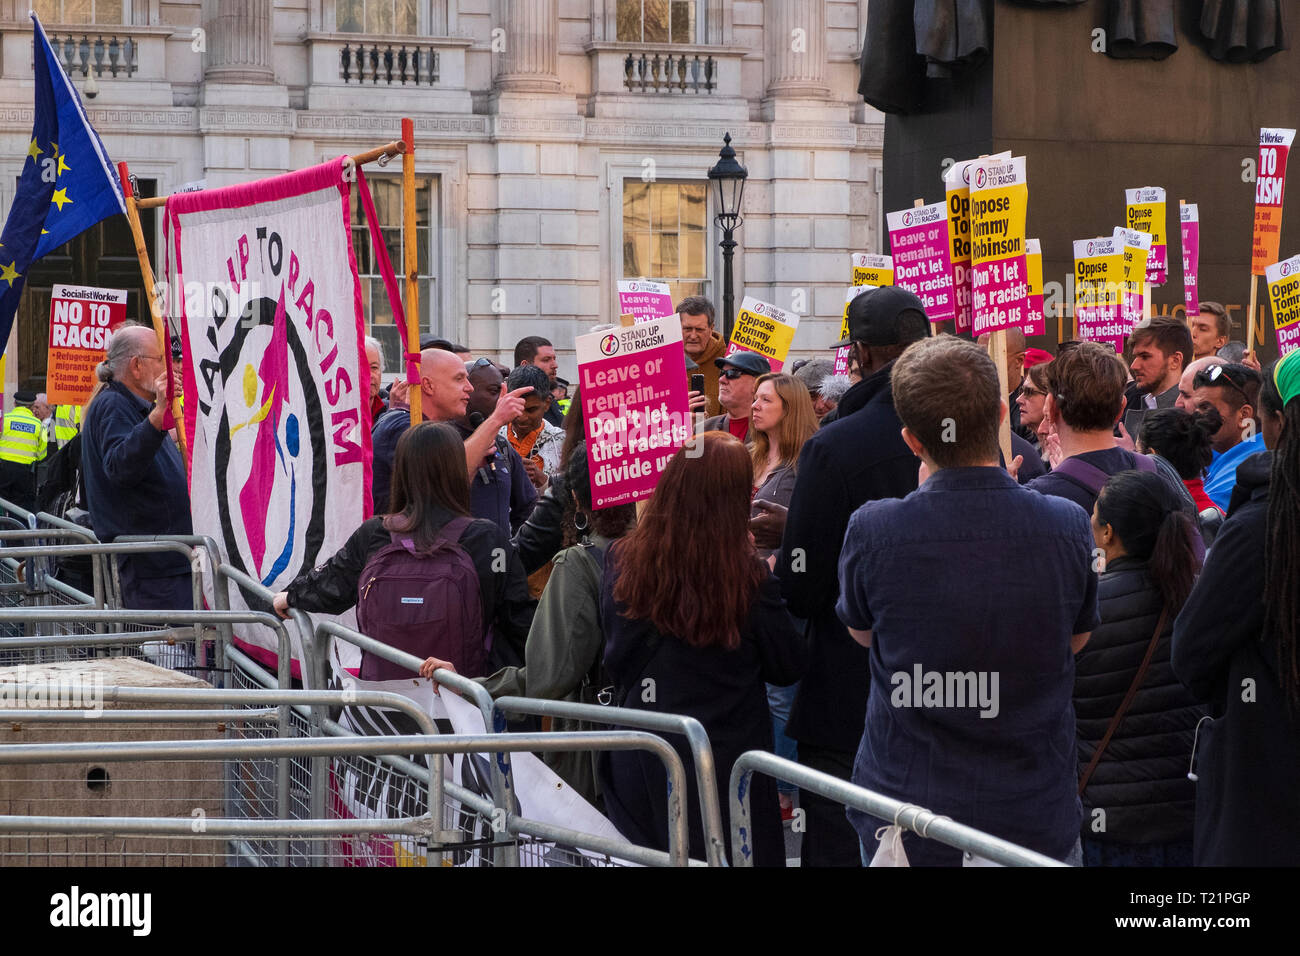 London, UK. 29th Mar, 2019. the day the UK was due to leave the EU. Near Downing Street on Whitehall a secure police cordon pens in demonstrators from the Stand Up to Racism group involved in a counter-demonstration to the pro-Brexit groups in Parliament Square. Credit: Scott Hortop/Alamy Live News. Stock Photo